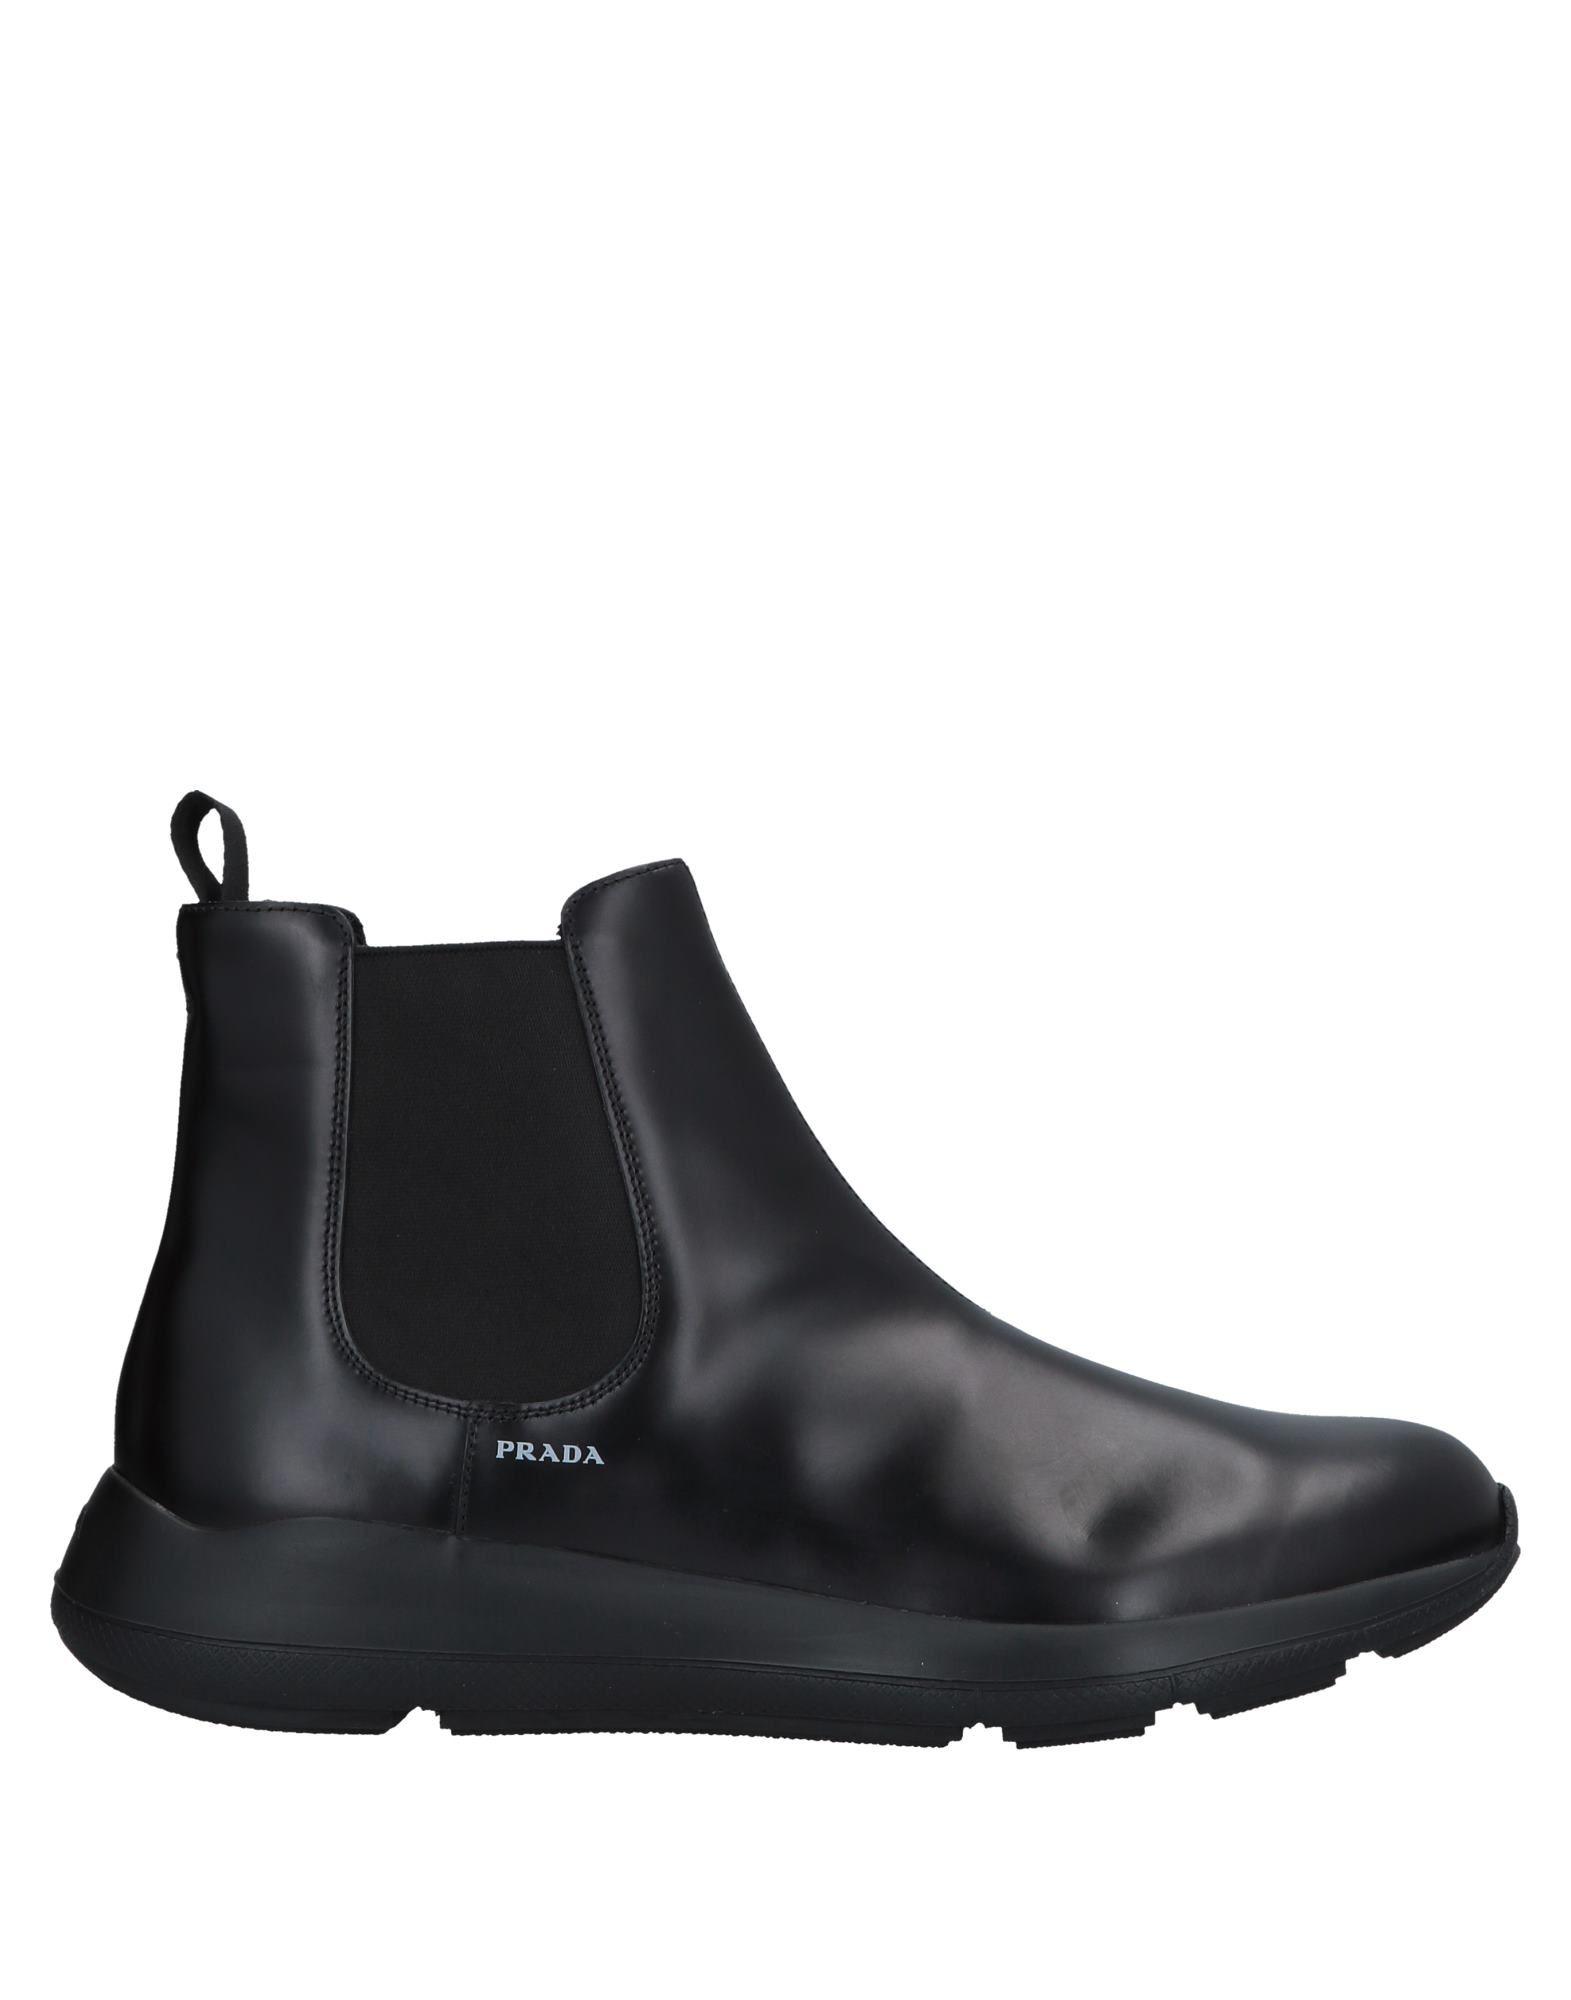 Prada Sport Leather Ankle Boots in Black for Men - Lyst